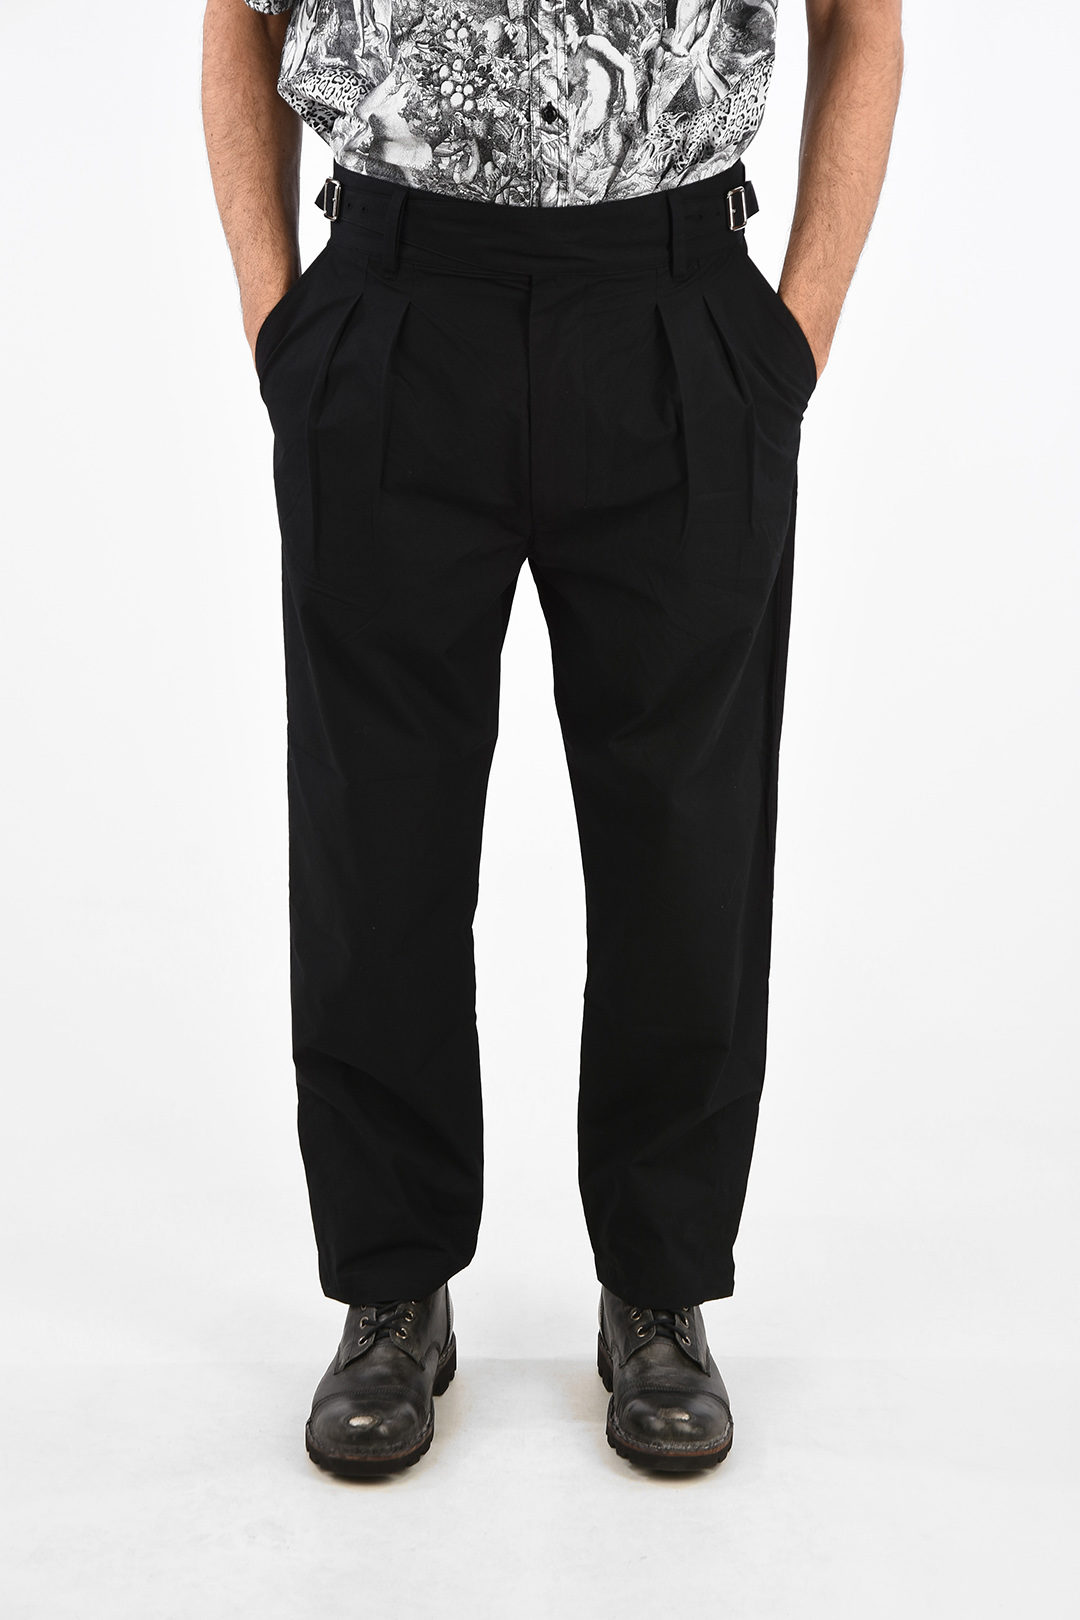 Basketball Official's Pants | Dalco Athletic – Officially Dalco